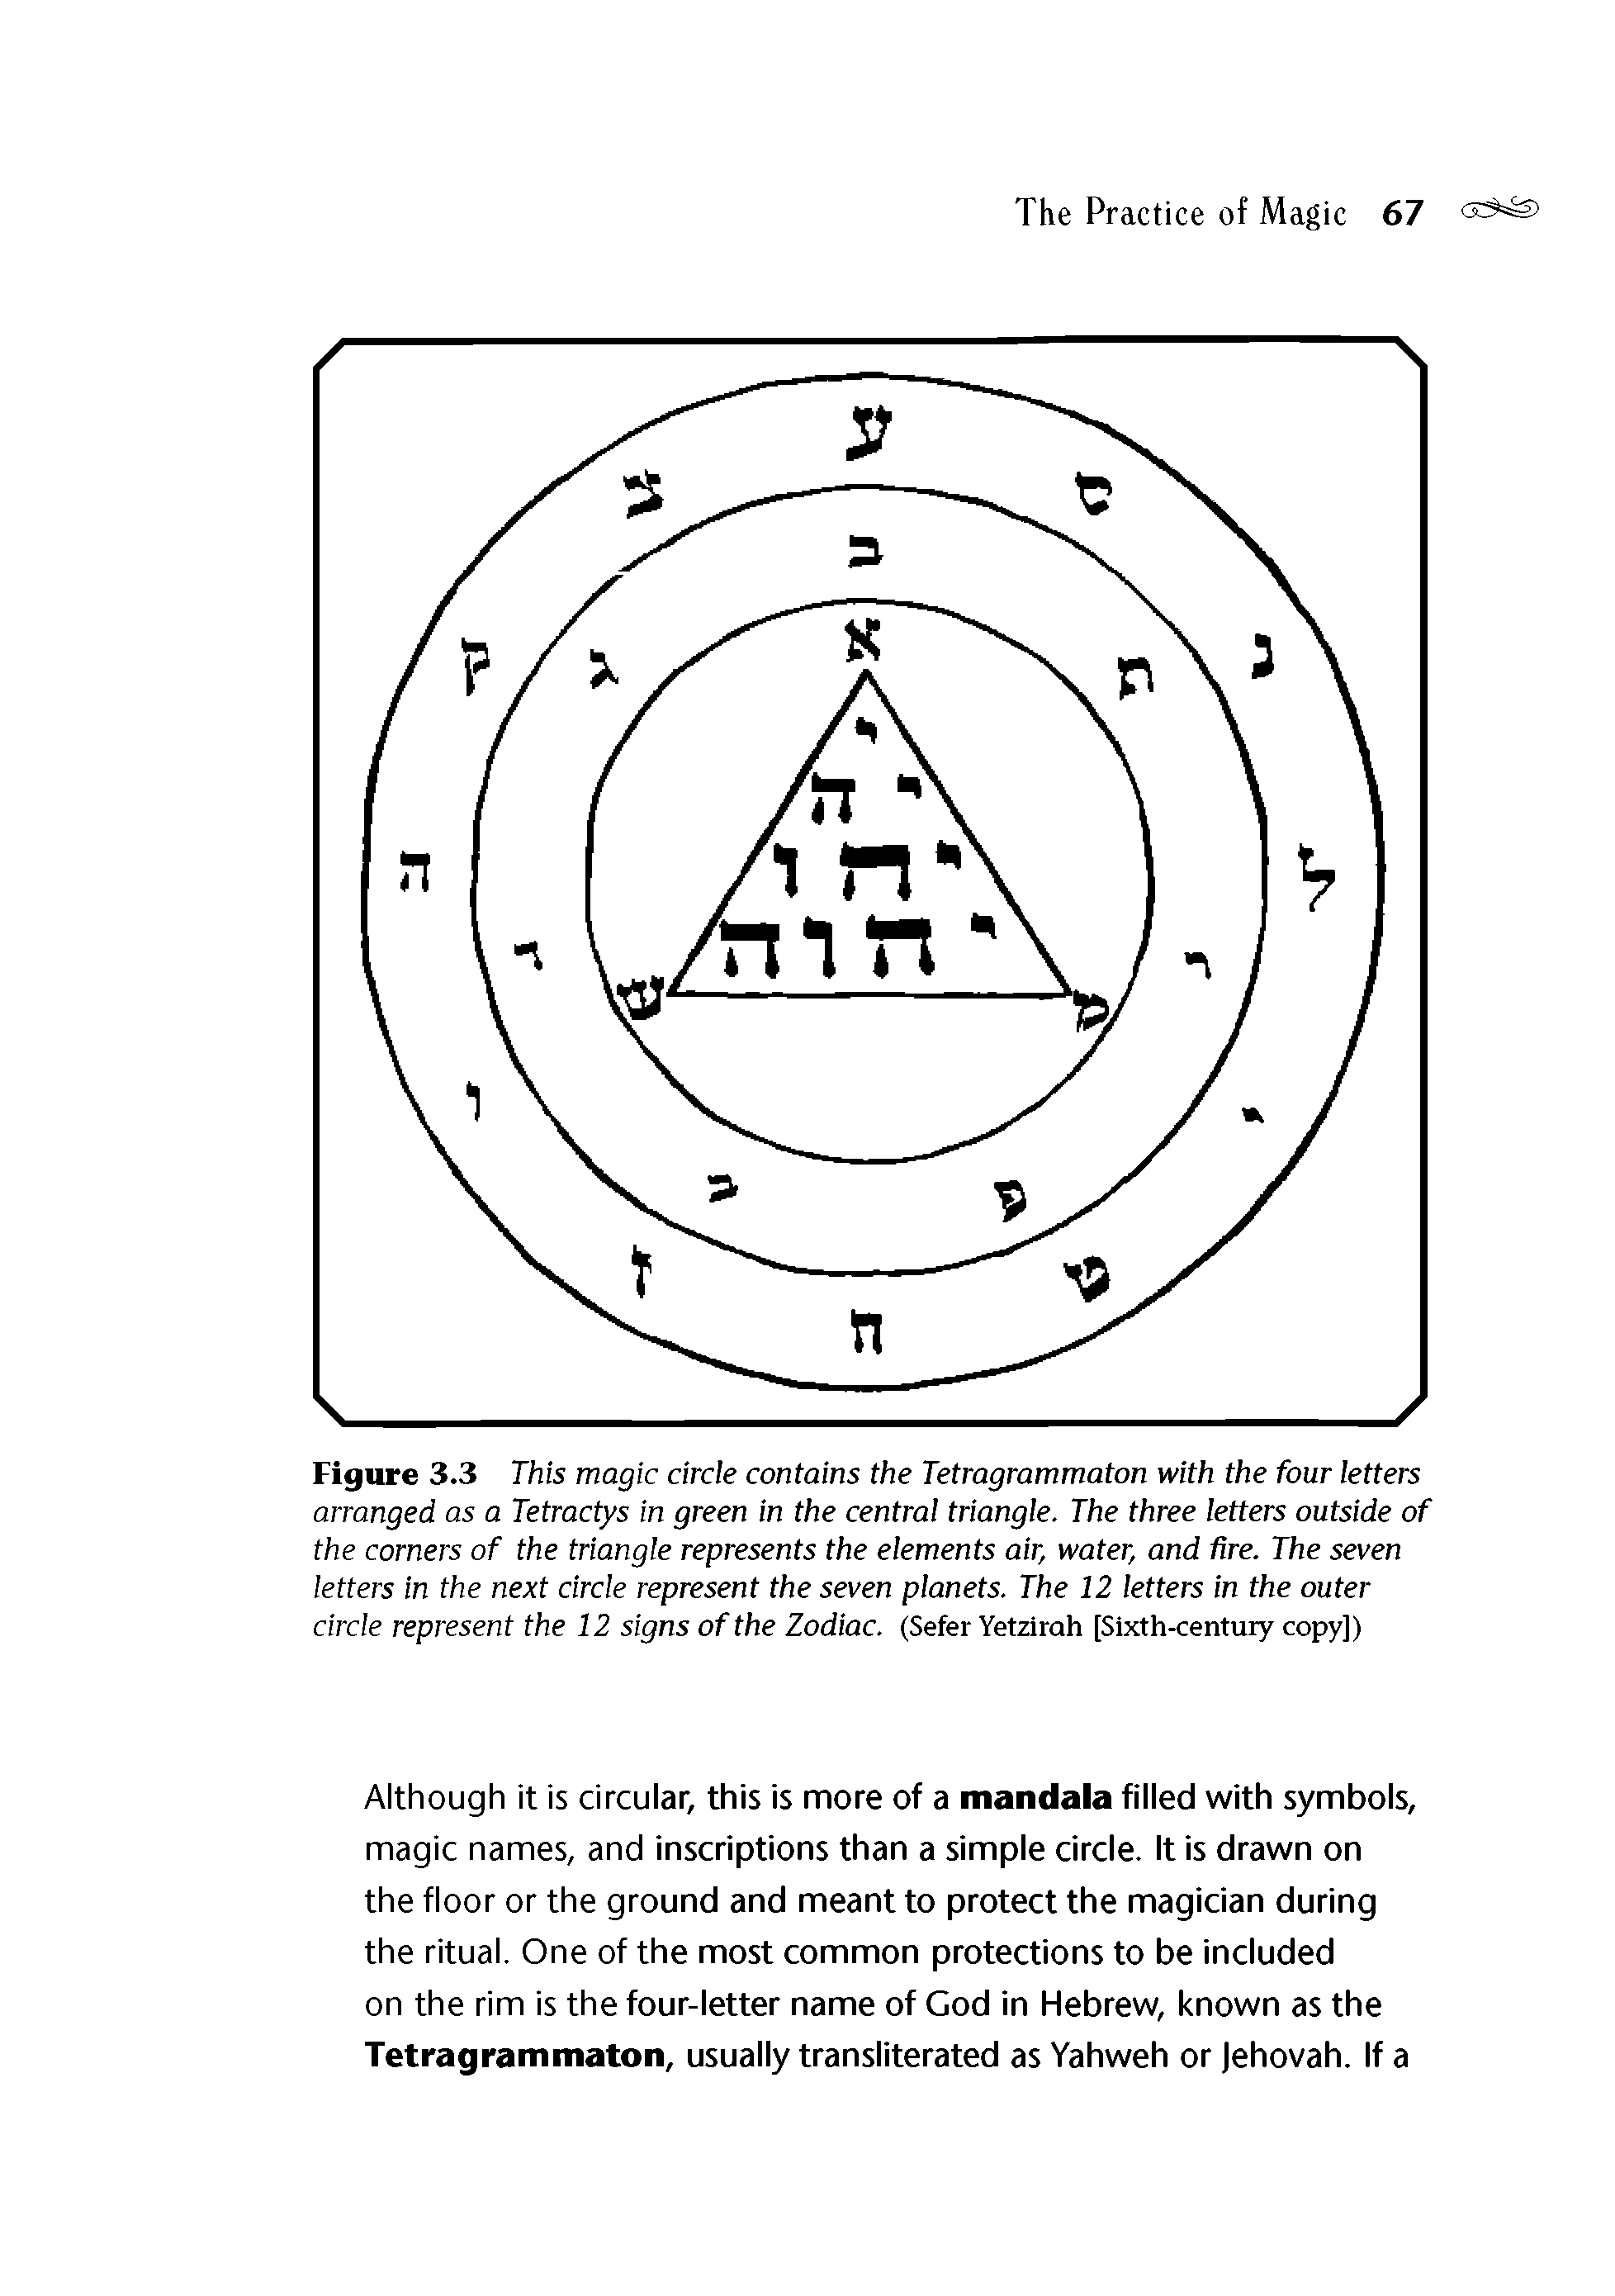 Figure 3.3 This magic circle contains the Tetragrammaton with the four letters arranged as a Tetractys in green in the central triangle. The three letters outside of the corners of the triangle represents the elements air, water, and fire. The seven letters in the next circle represent the seven planets. The 12 letters in the outer circle represent the 12 signs of the Zodiac. (Sefer Yetzirah [Sixth-century copy])...